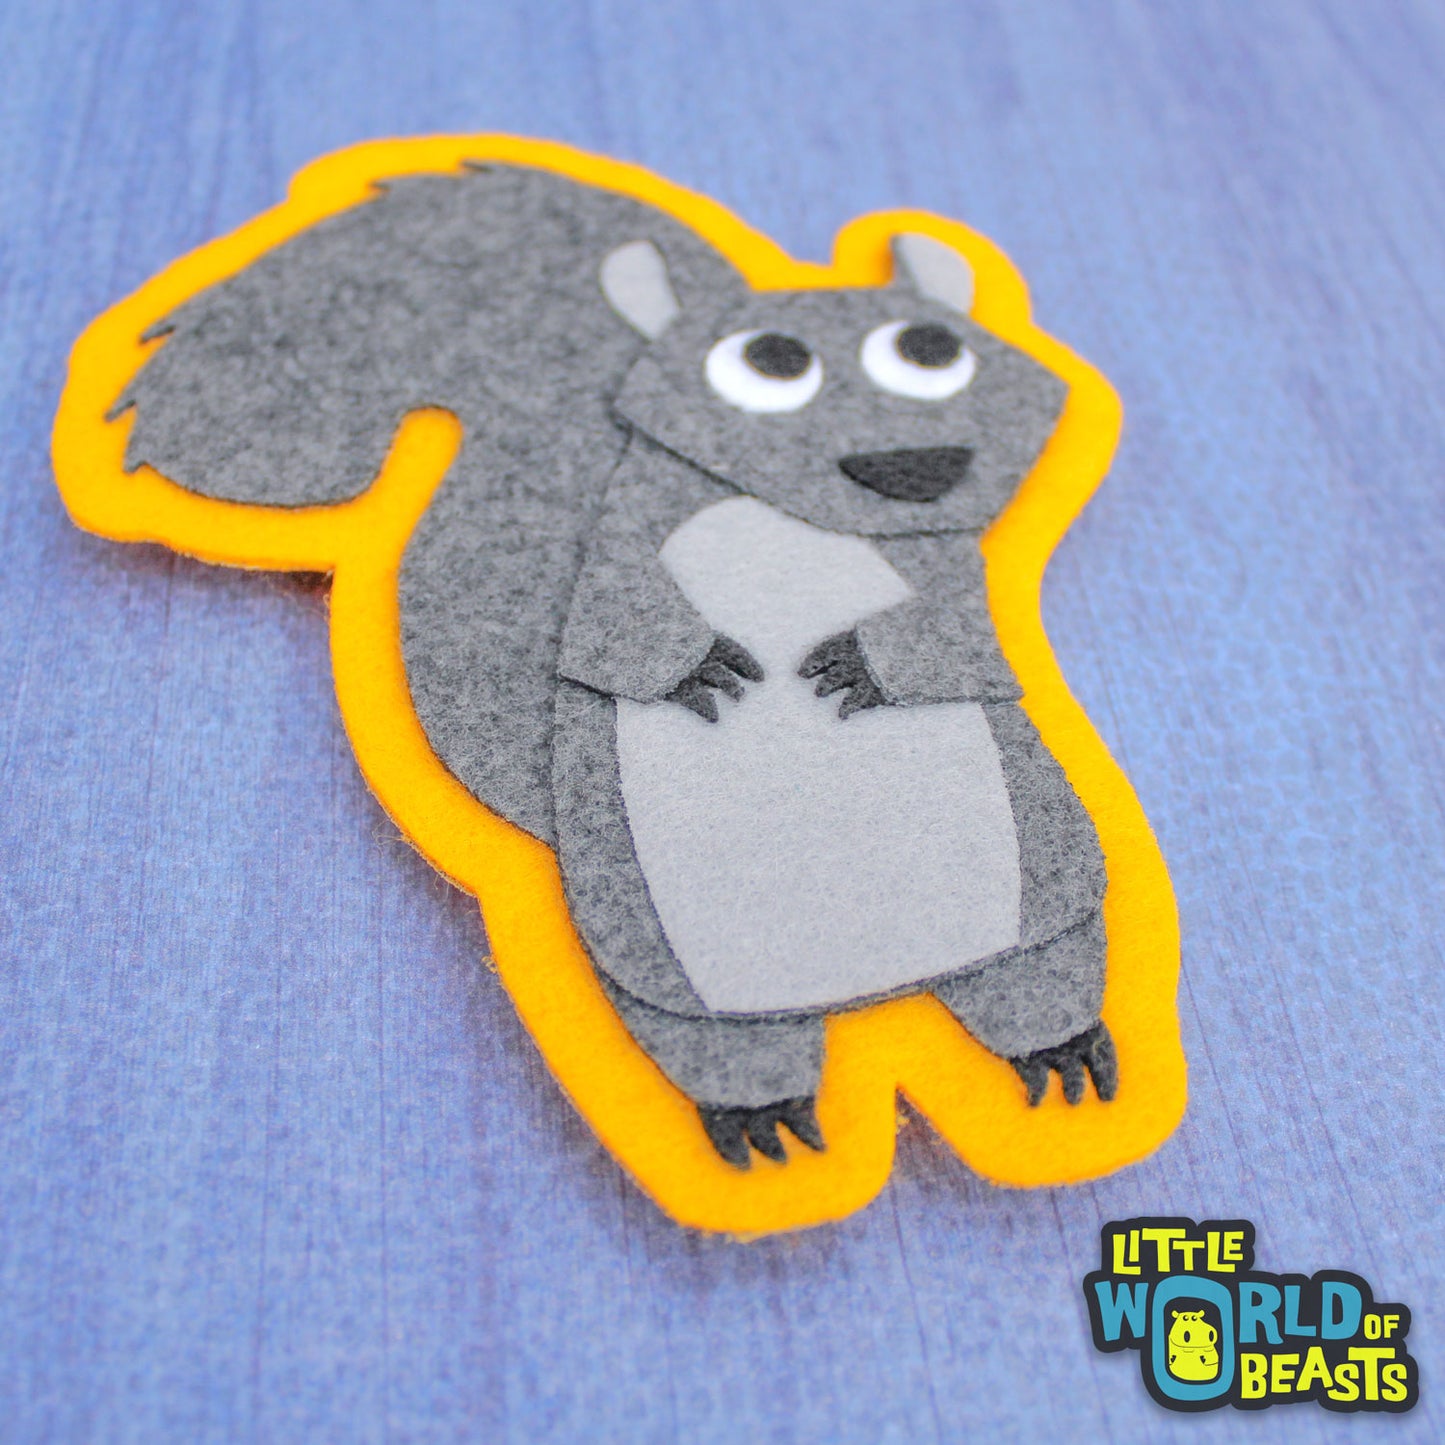 Greta the Squirrel Patch - Sew on or Iron on Woodland Applique 